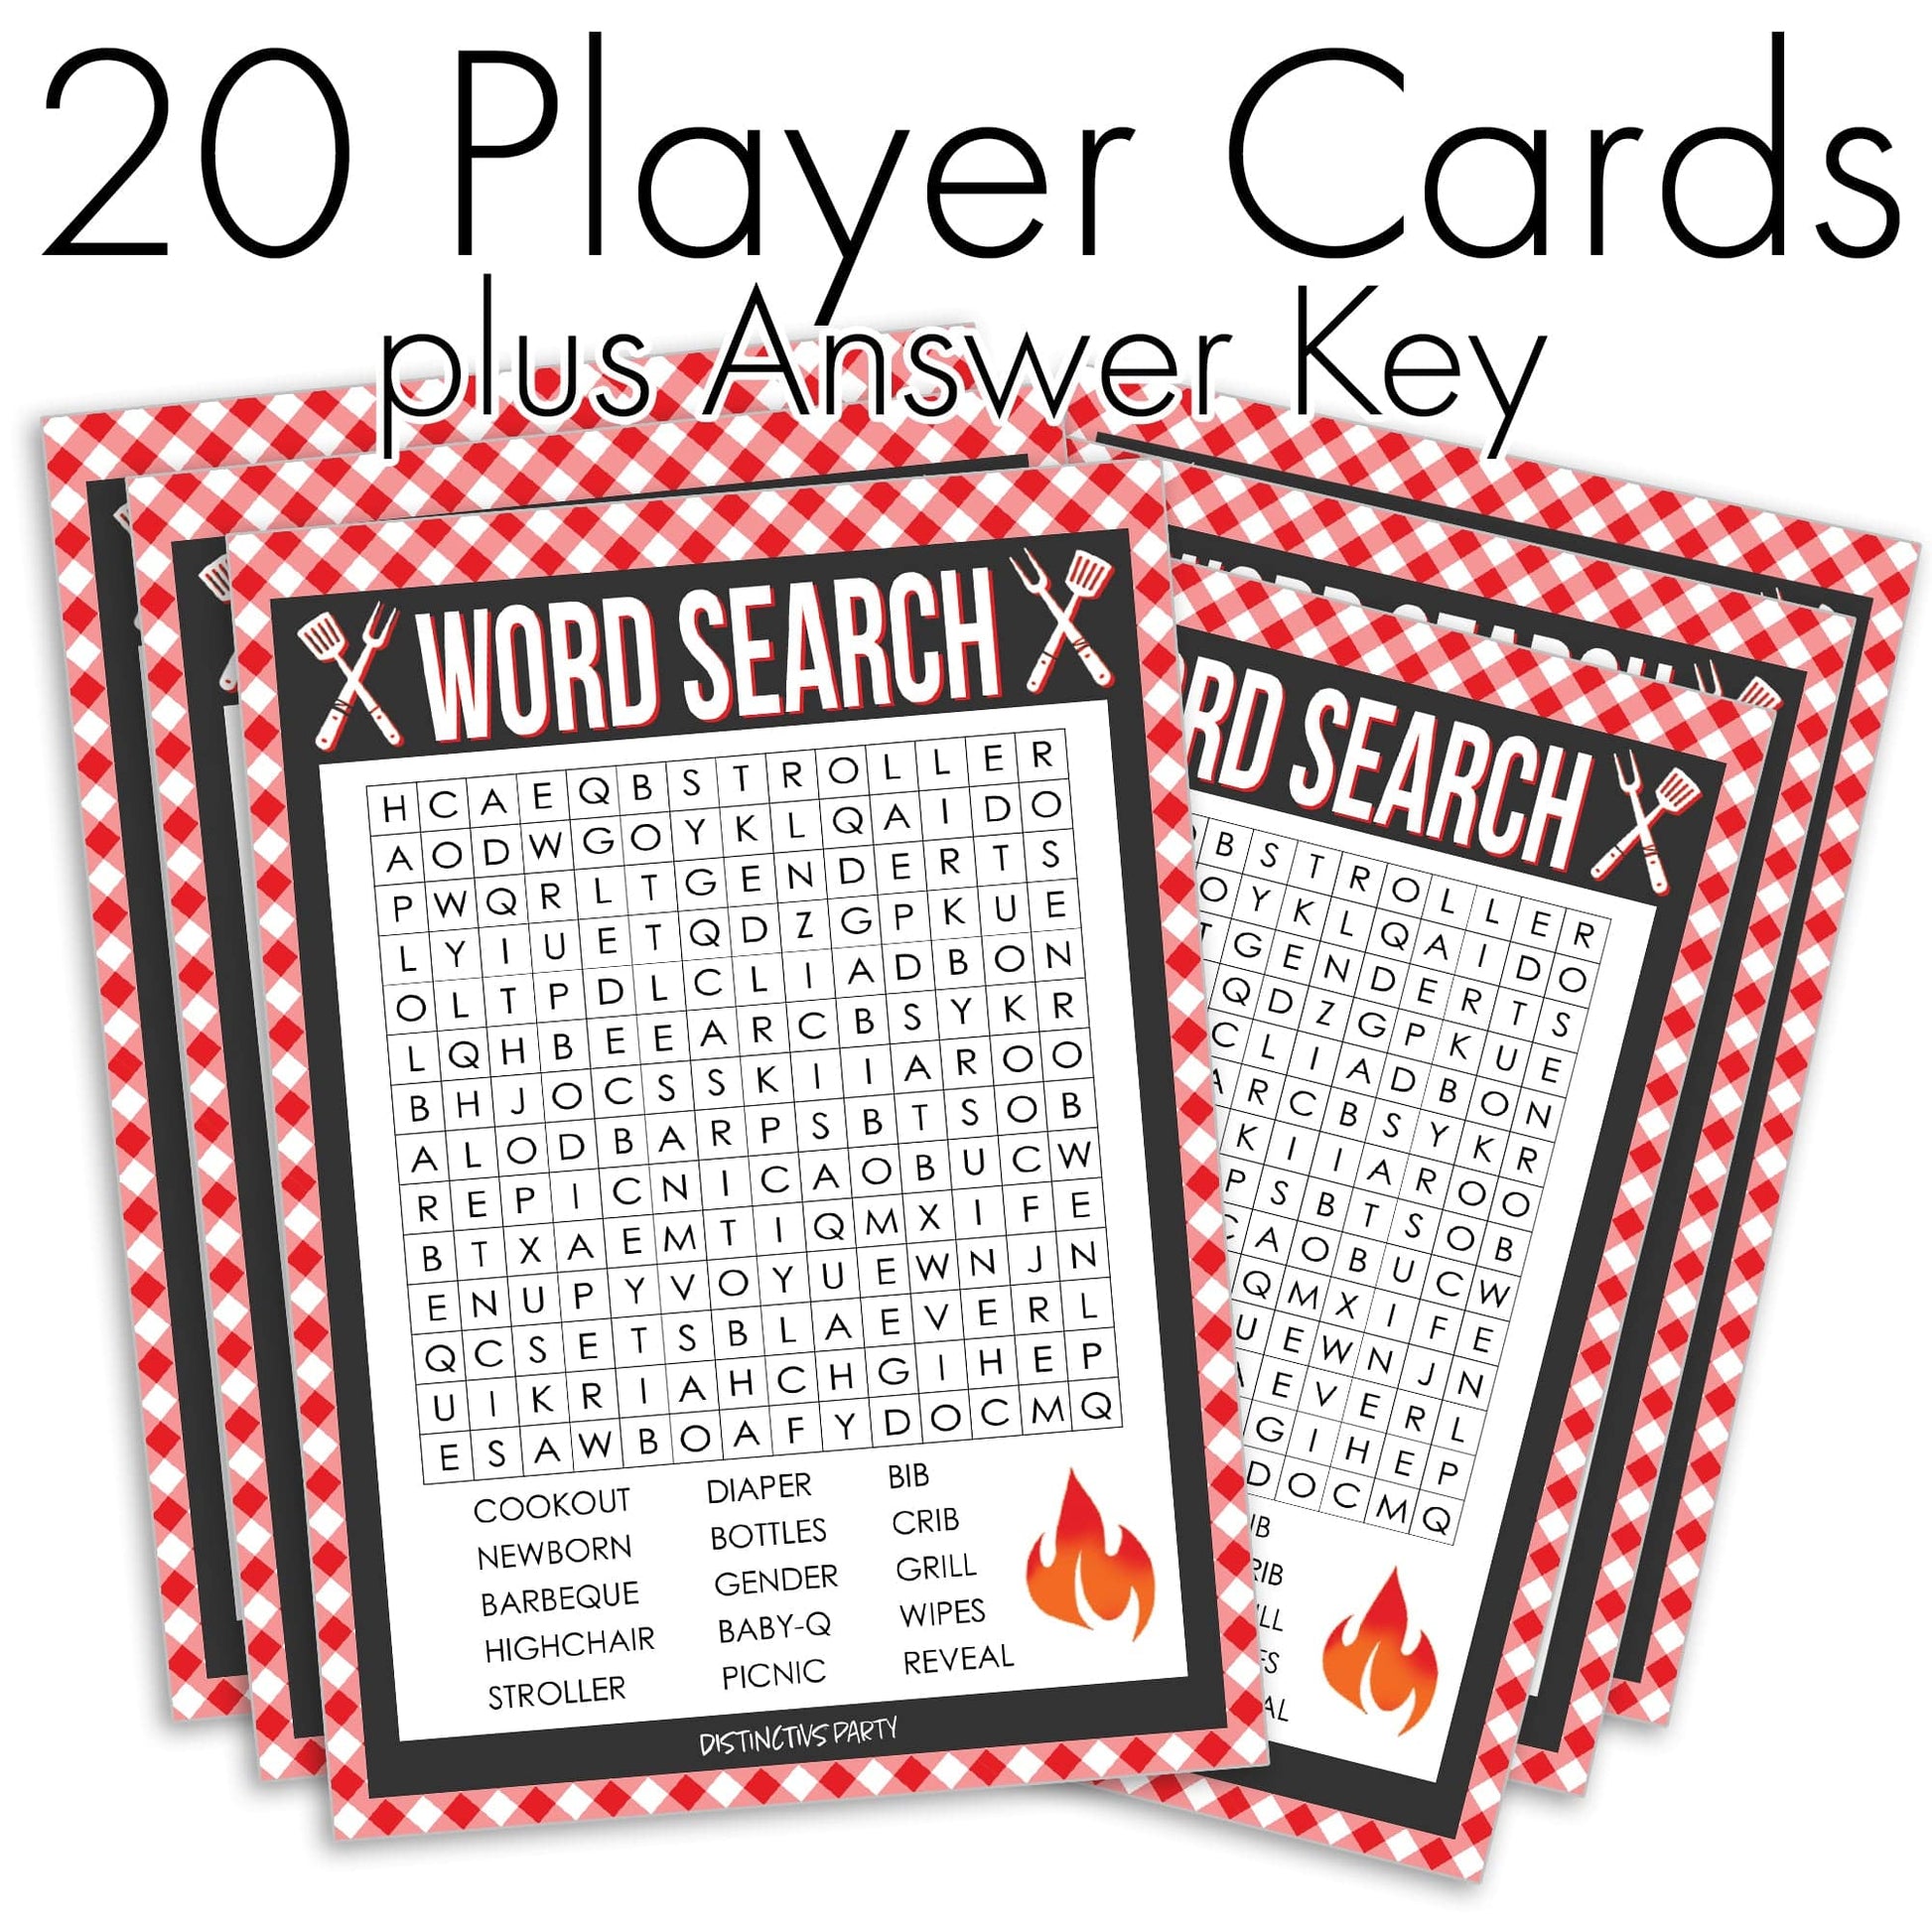 Baby-Q Barbecue Gender Reveal Party - Word Search - 20 Player Cards